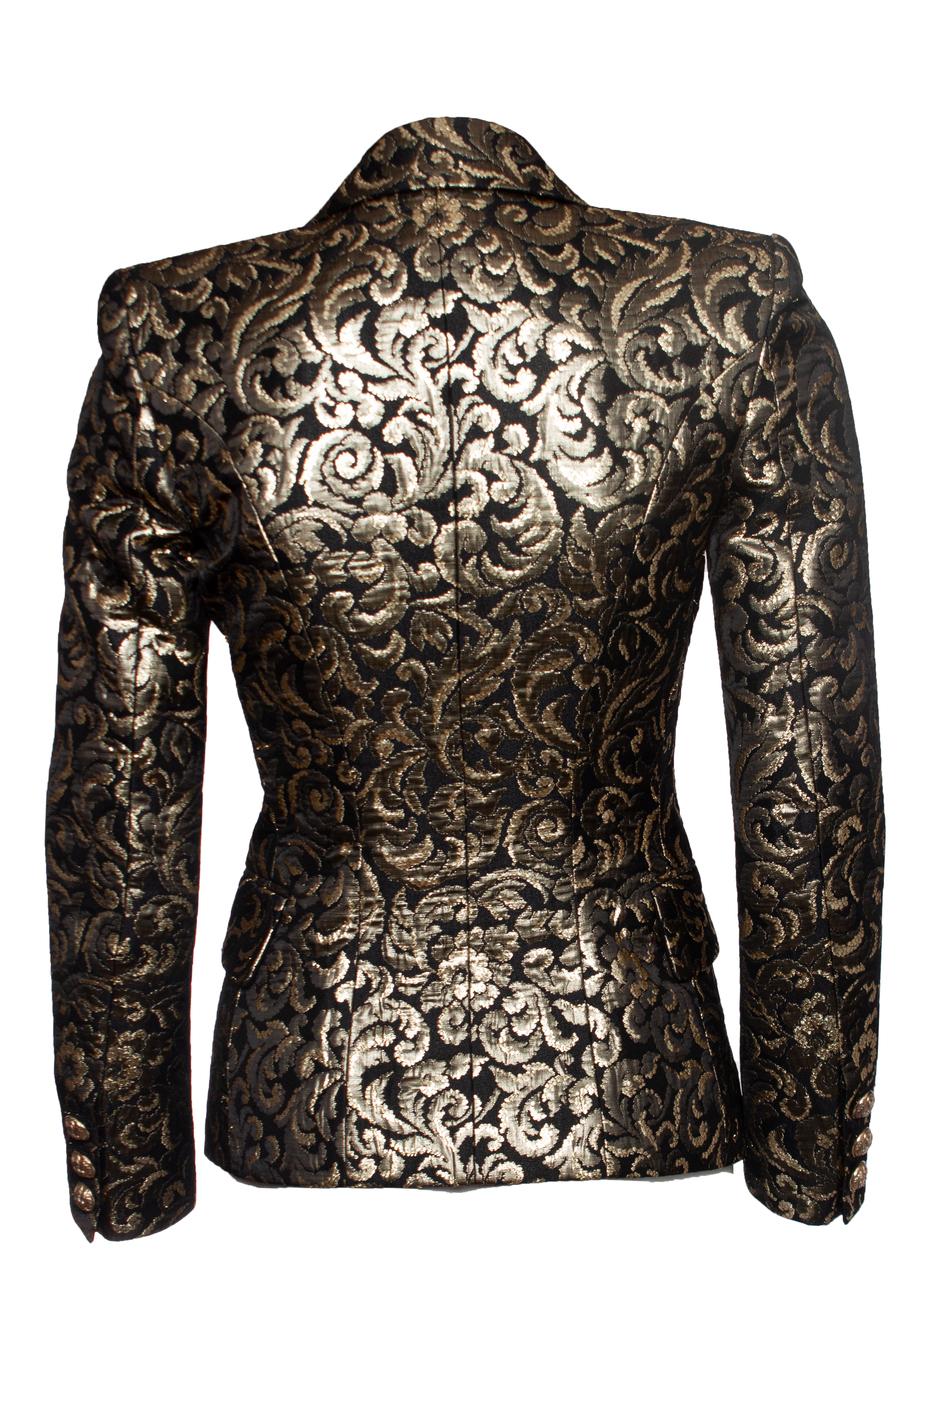 Balmain, jacquard woven single breasted ornament blazer in black and gold. The item is in good condition (small pulls in fabric).

• CONDITION: good condition 

• SIZE: FR36 - XS

• MEASUREMENTS: length 60 cm, width 42 cm, waist 36 cm, shoulder